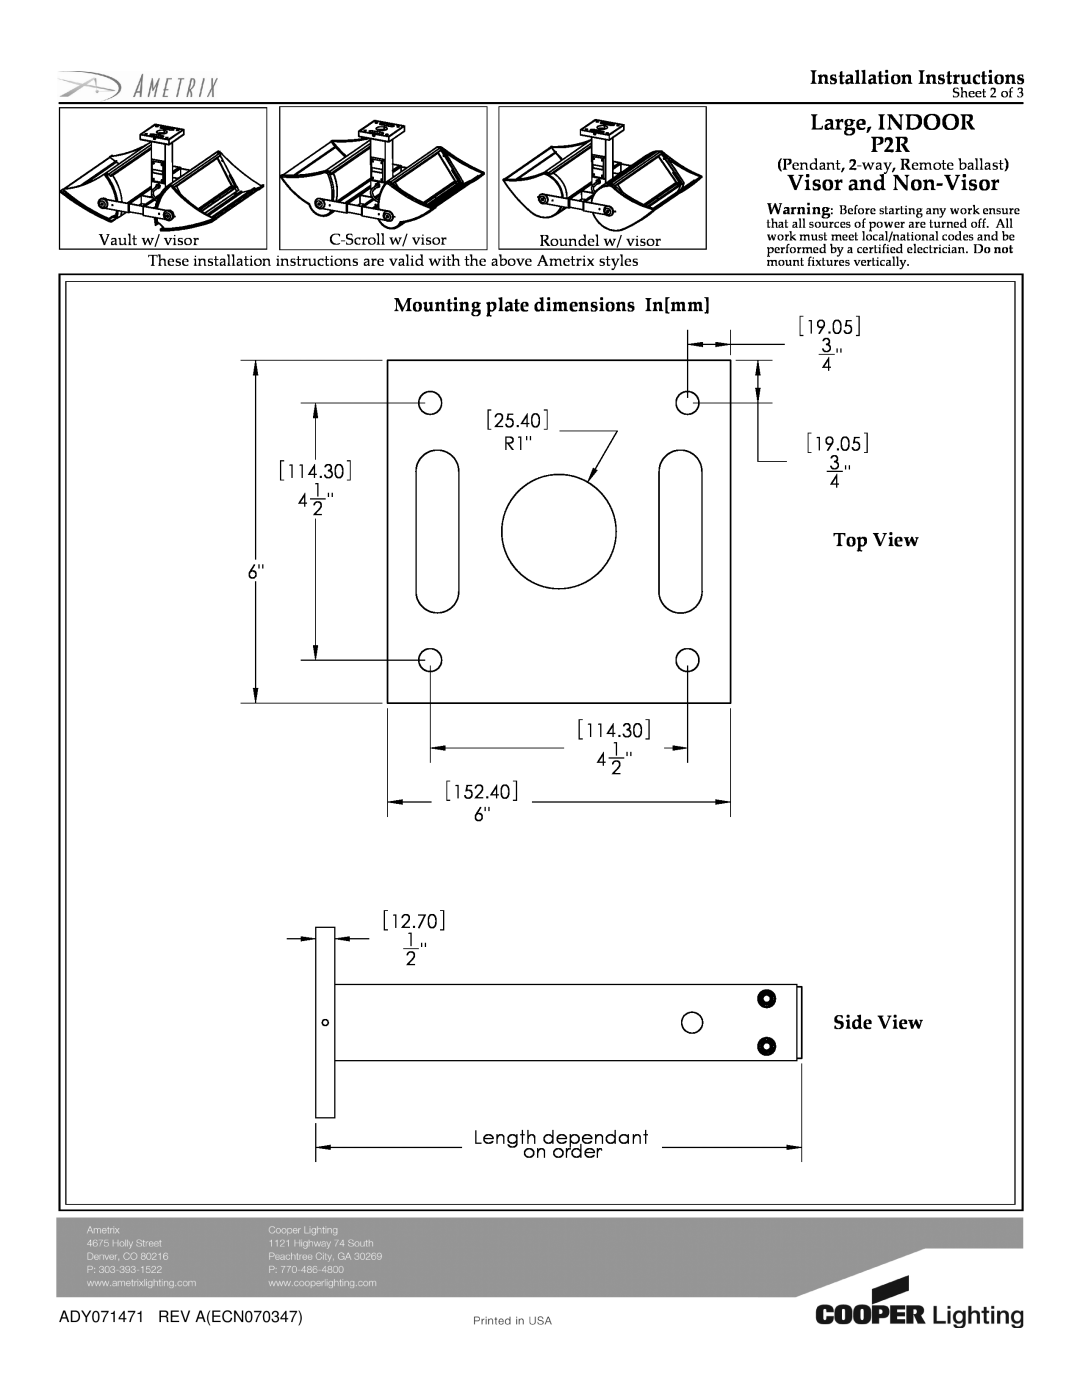 Cooper Lighting Large, INDOOR P2R, Visor and Non-Visor, Installation Instructions, Mounting plate dimensions Inmm 